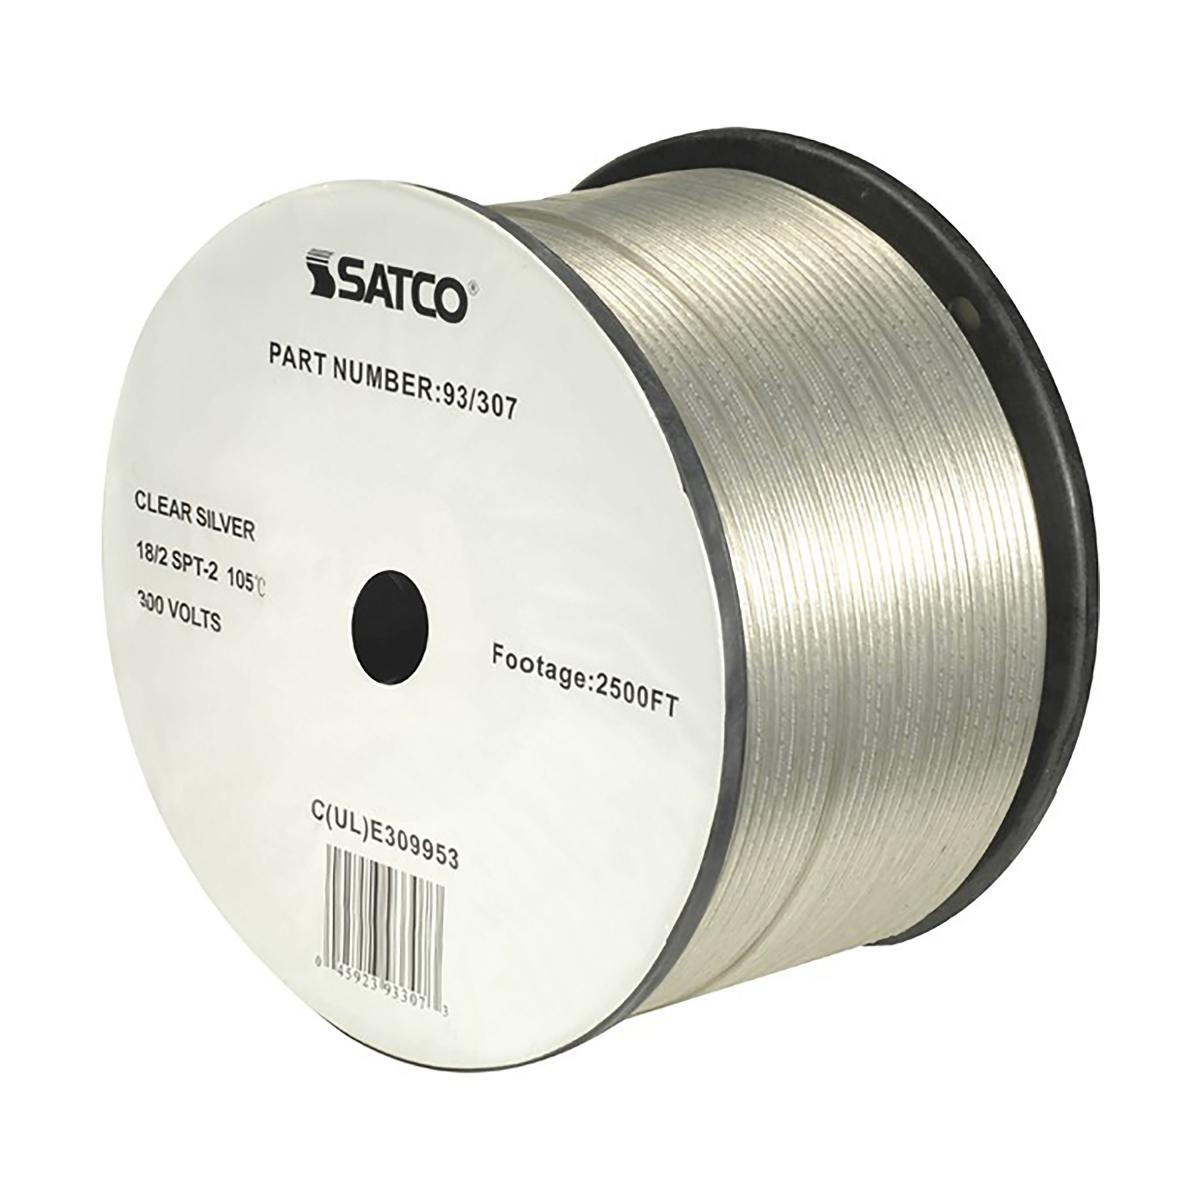 Satco 93-307 Lamp And Lighting Bulk Wire 18/2 SPT-2 105C 2500 Foot/Reel Clear Silver